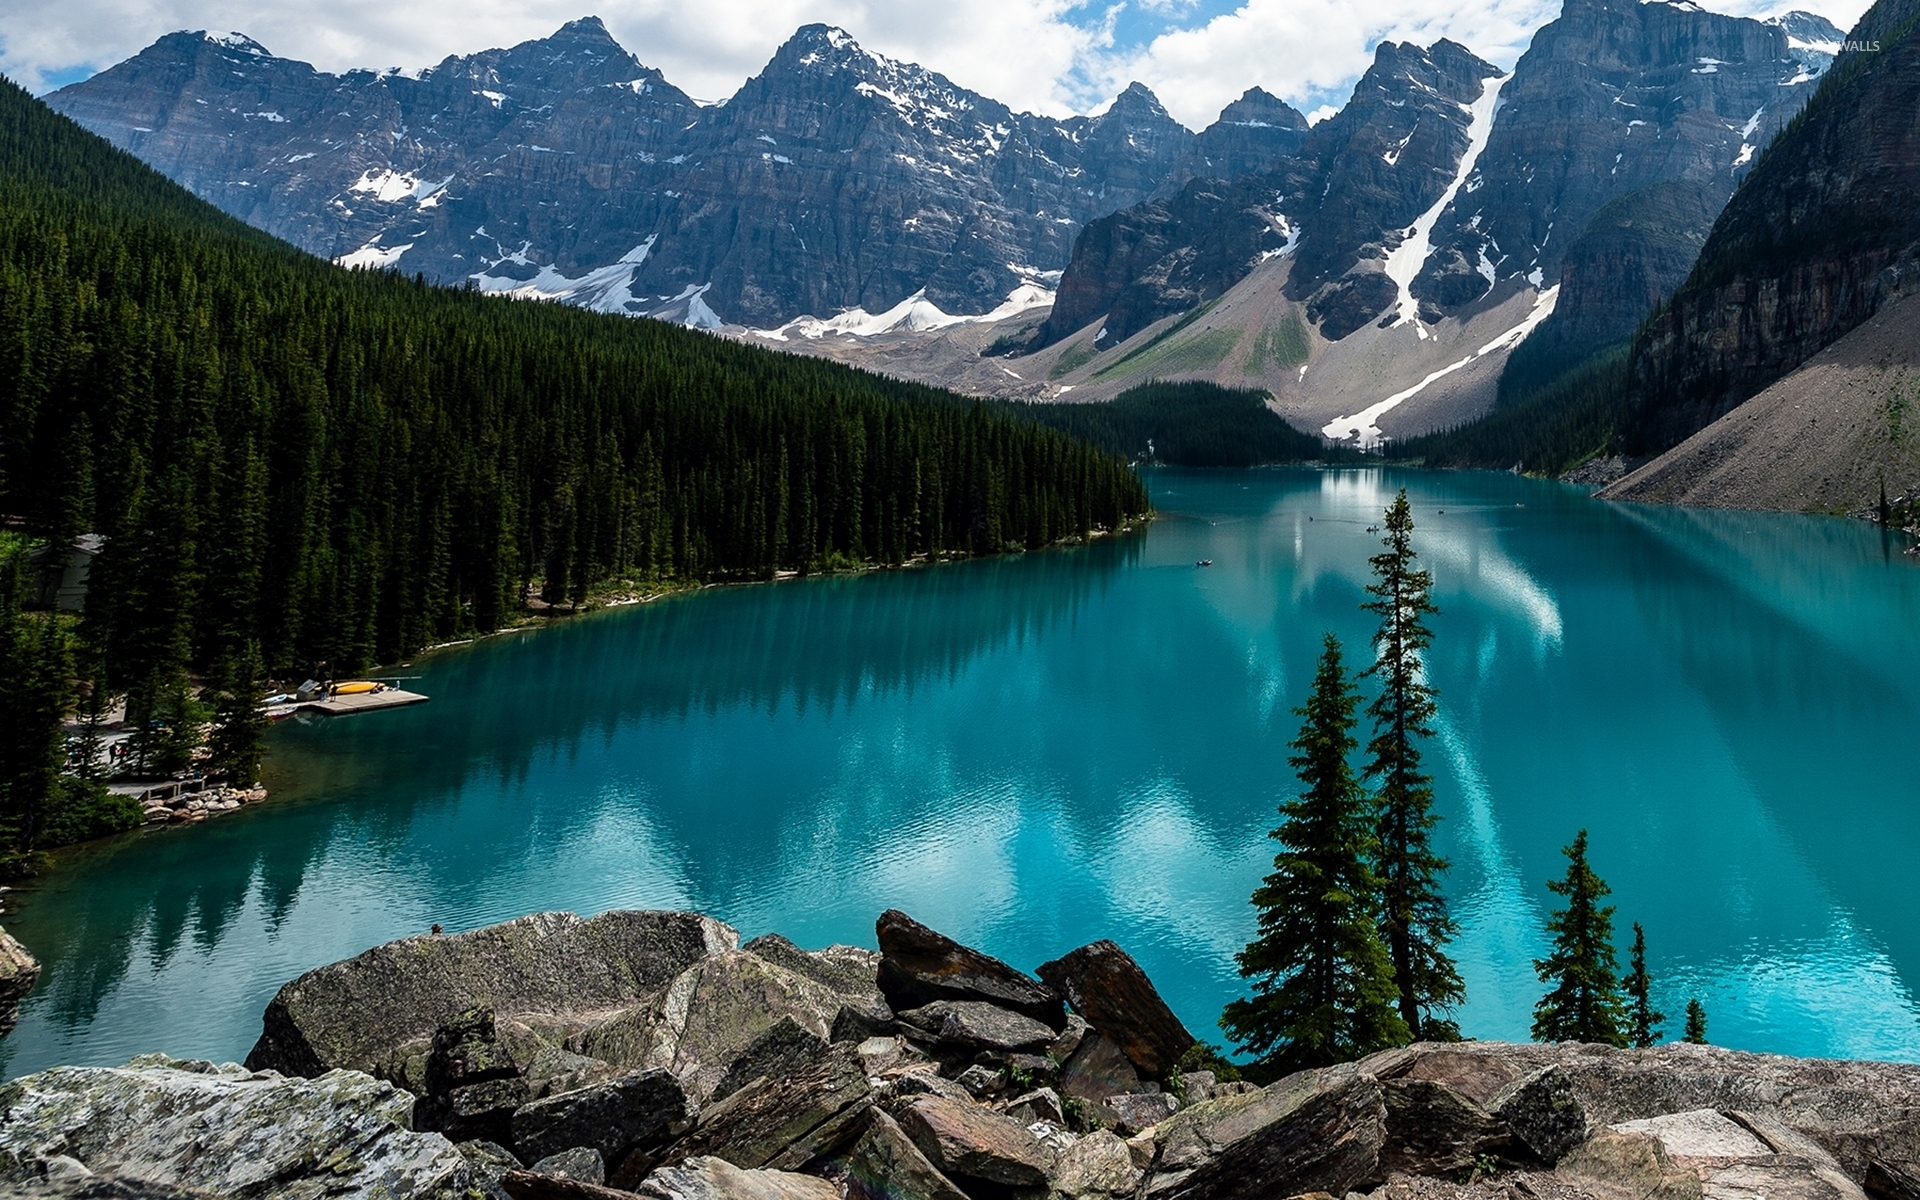 Amazing turquoise water in Moraine Lake wallpaper